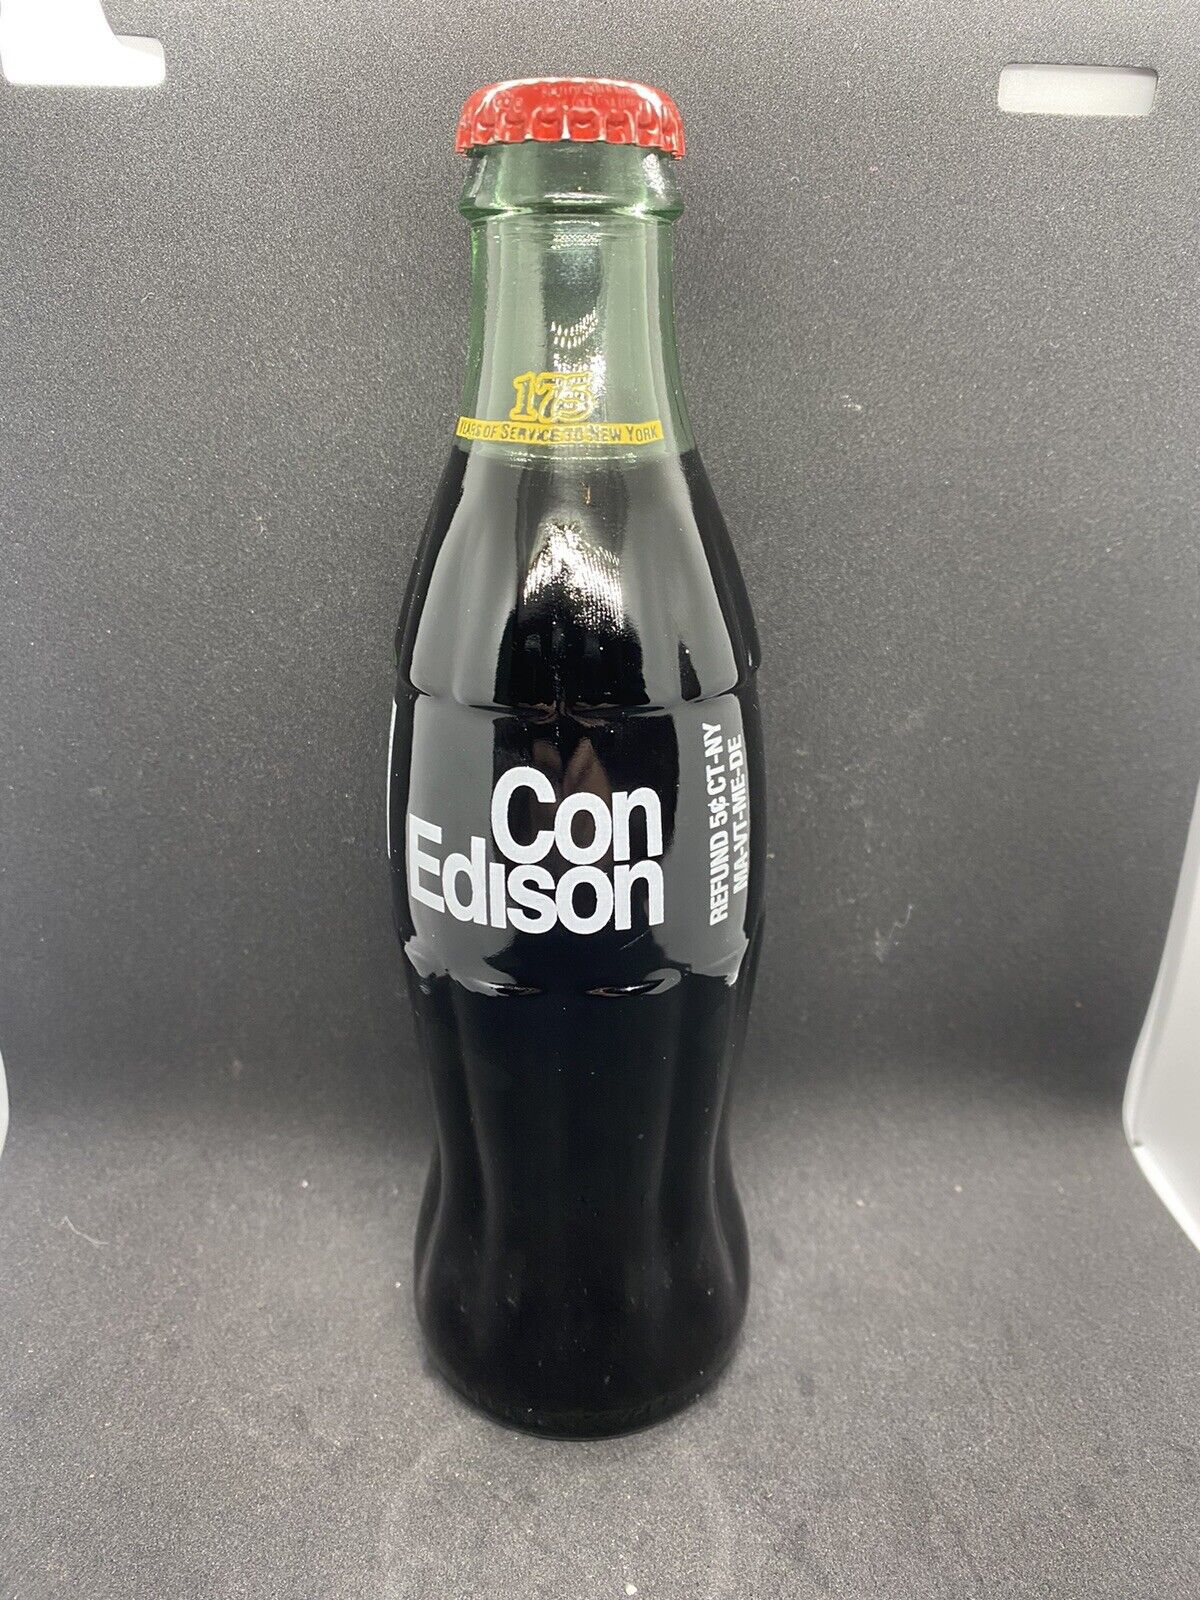 Con Edison Bottle This bottle was released in 1999 for the 175th Anniversary of Con Edison. 175 Years of Service is on the Neck. It has a Value of $15